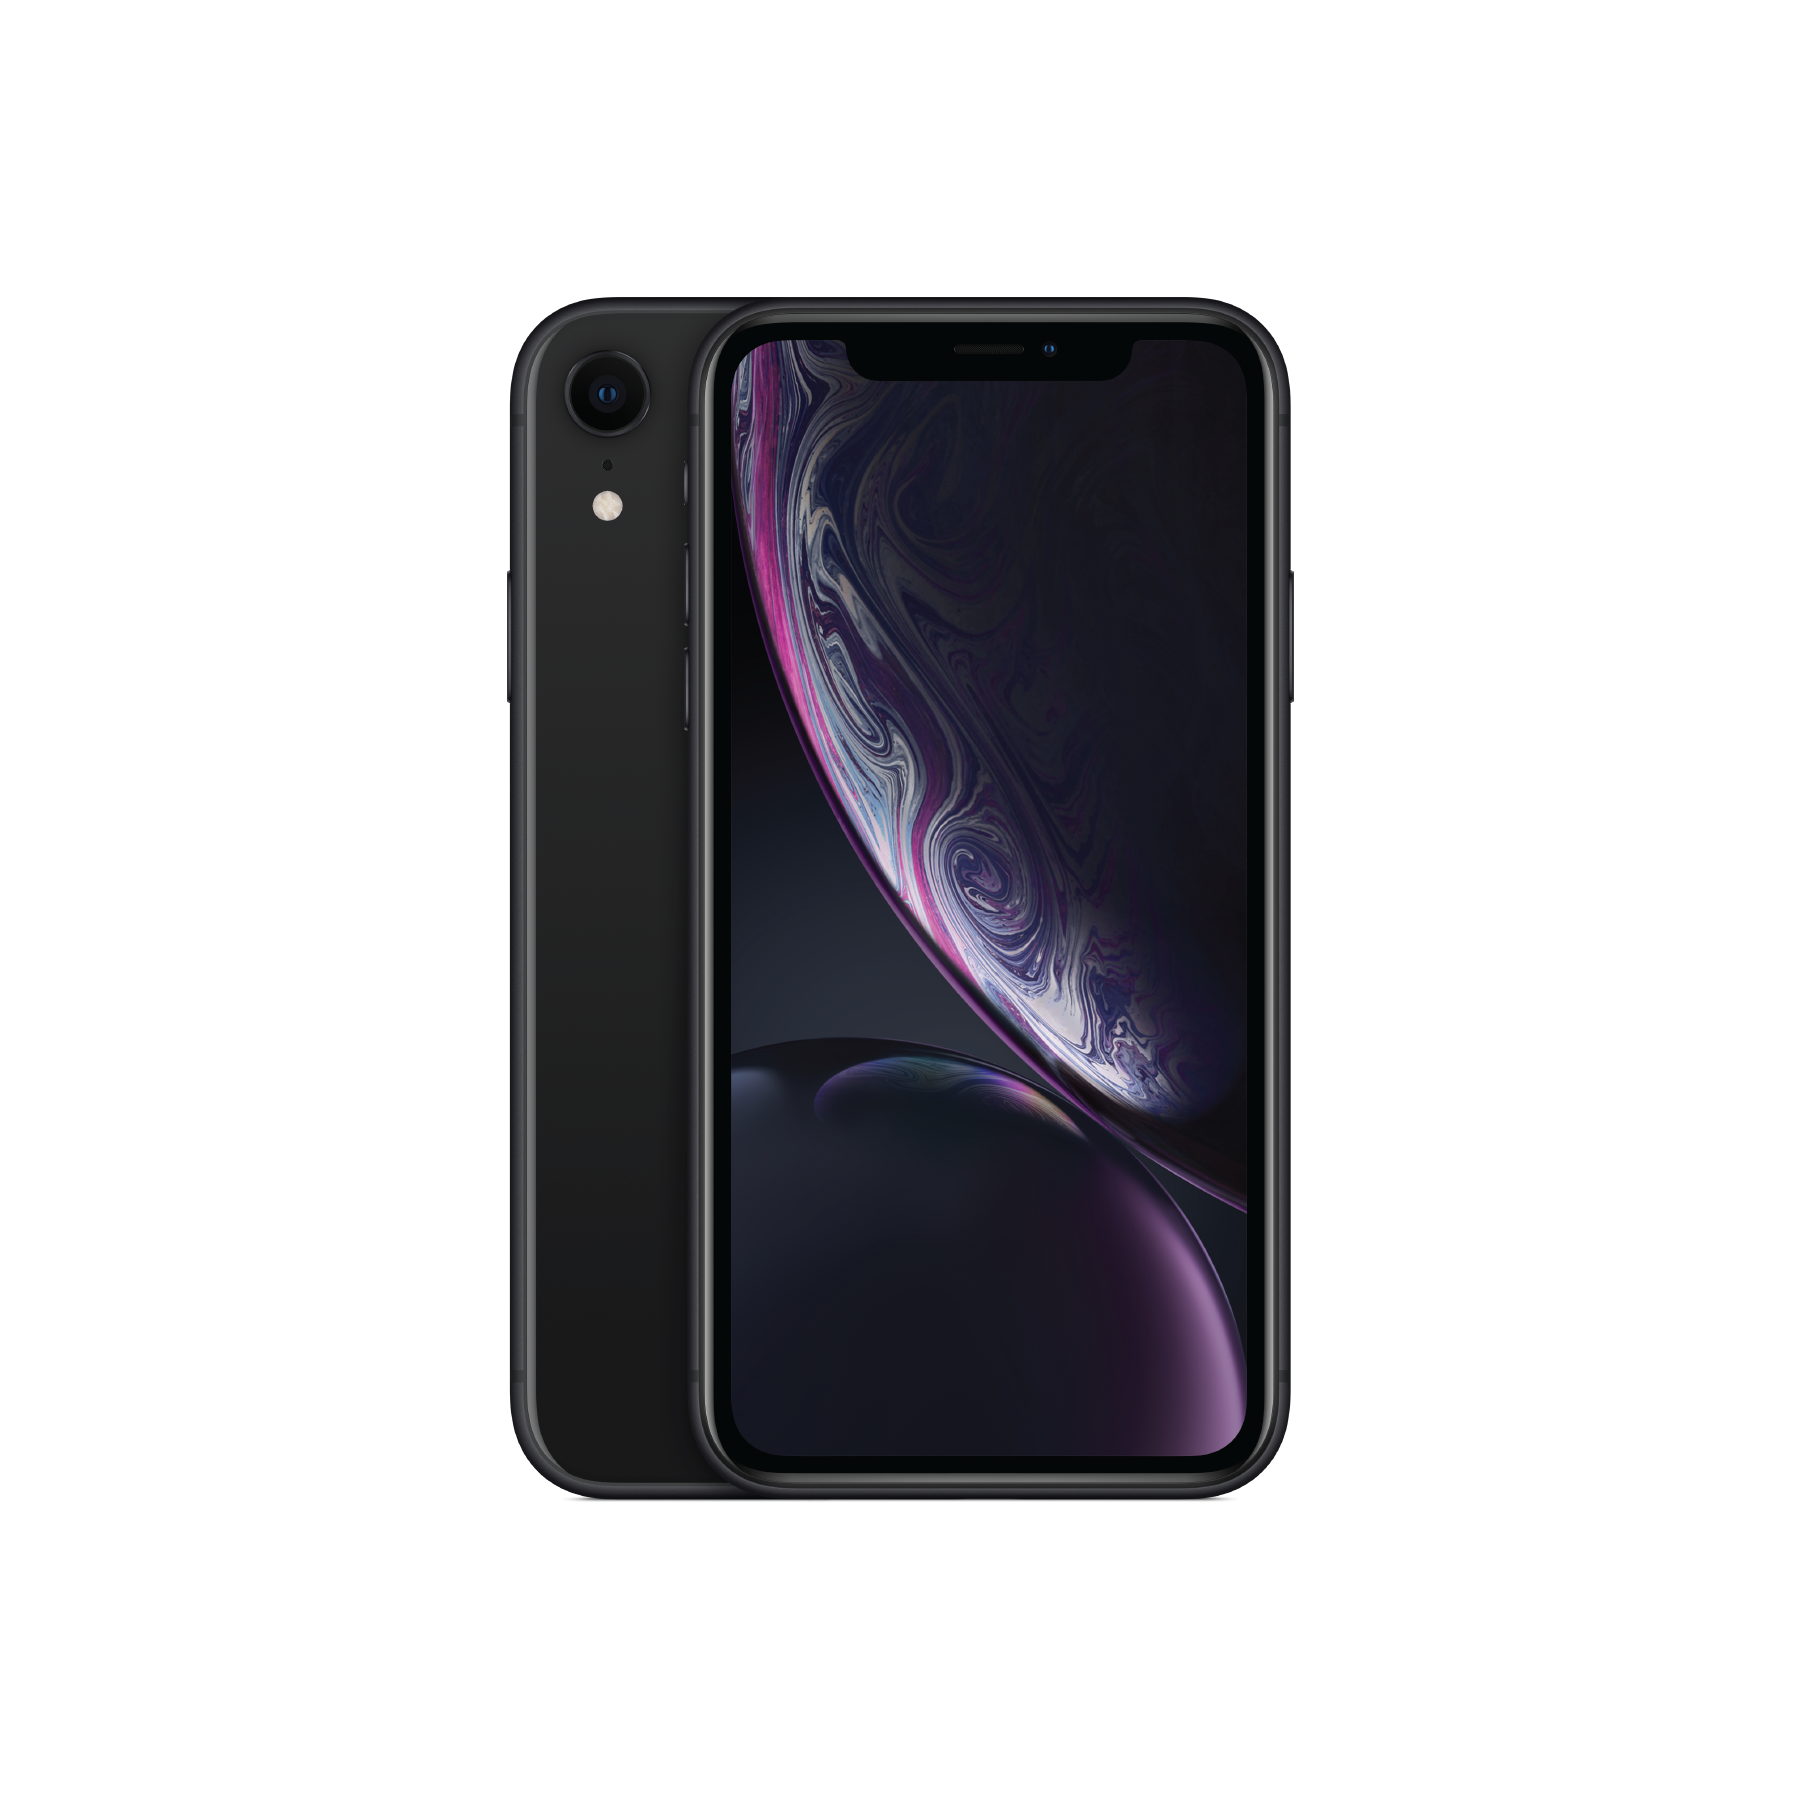 iPhone XR 64GB - Black (Good) - iStore Pre-owned